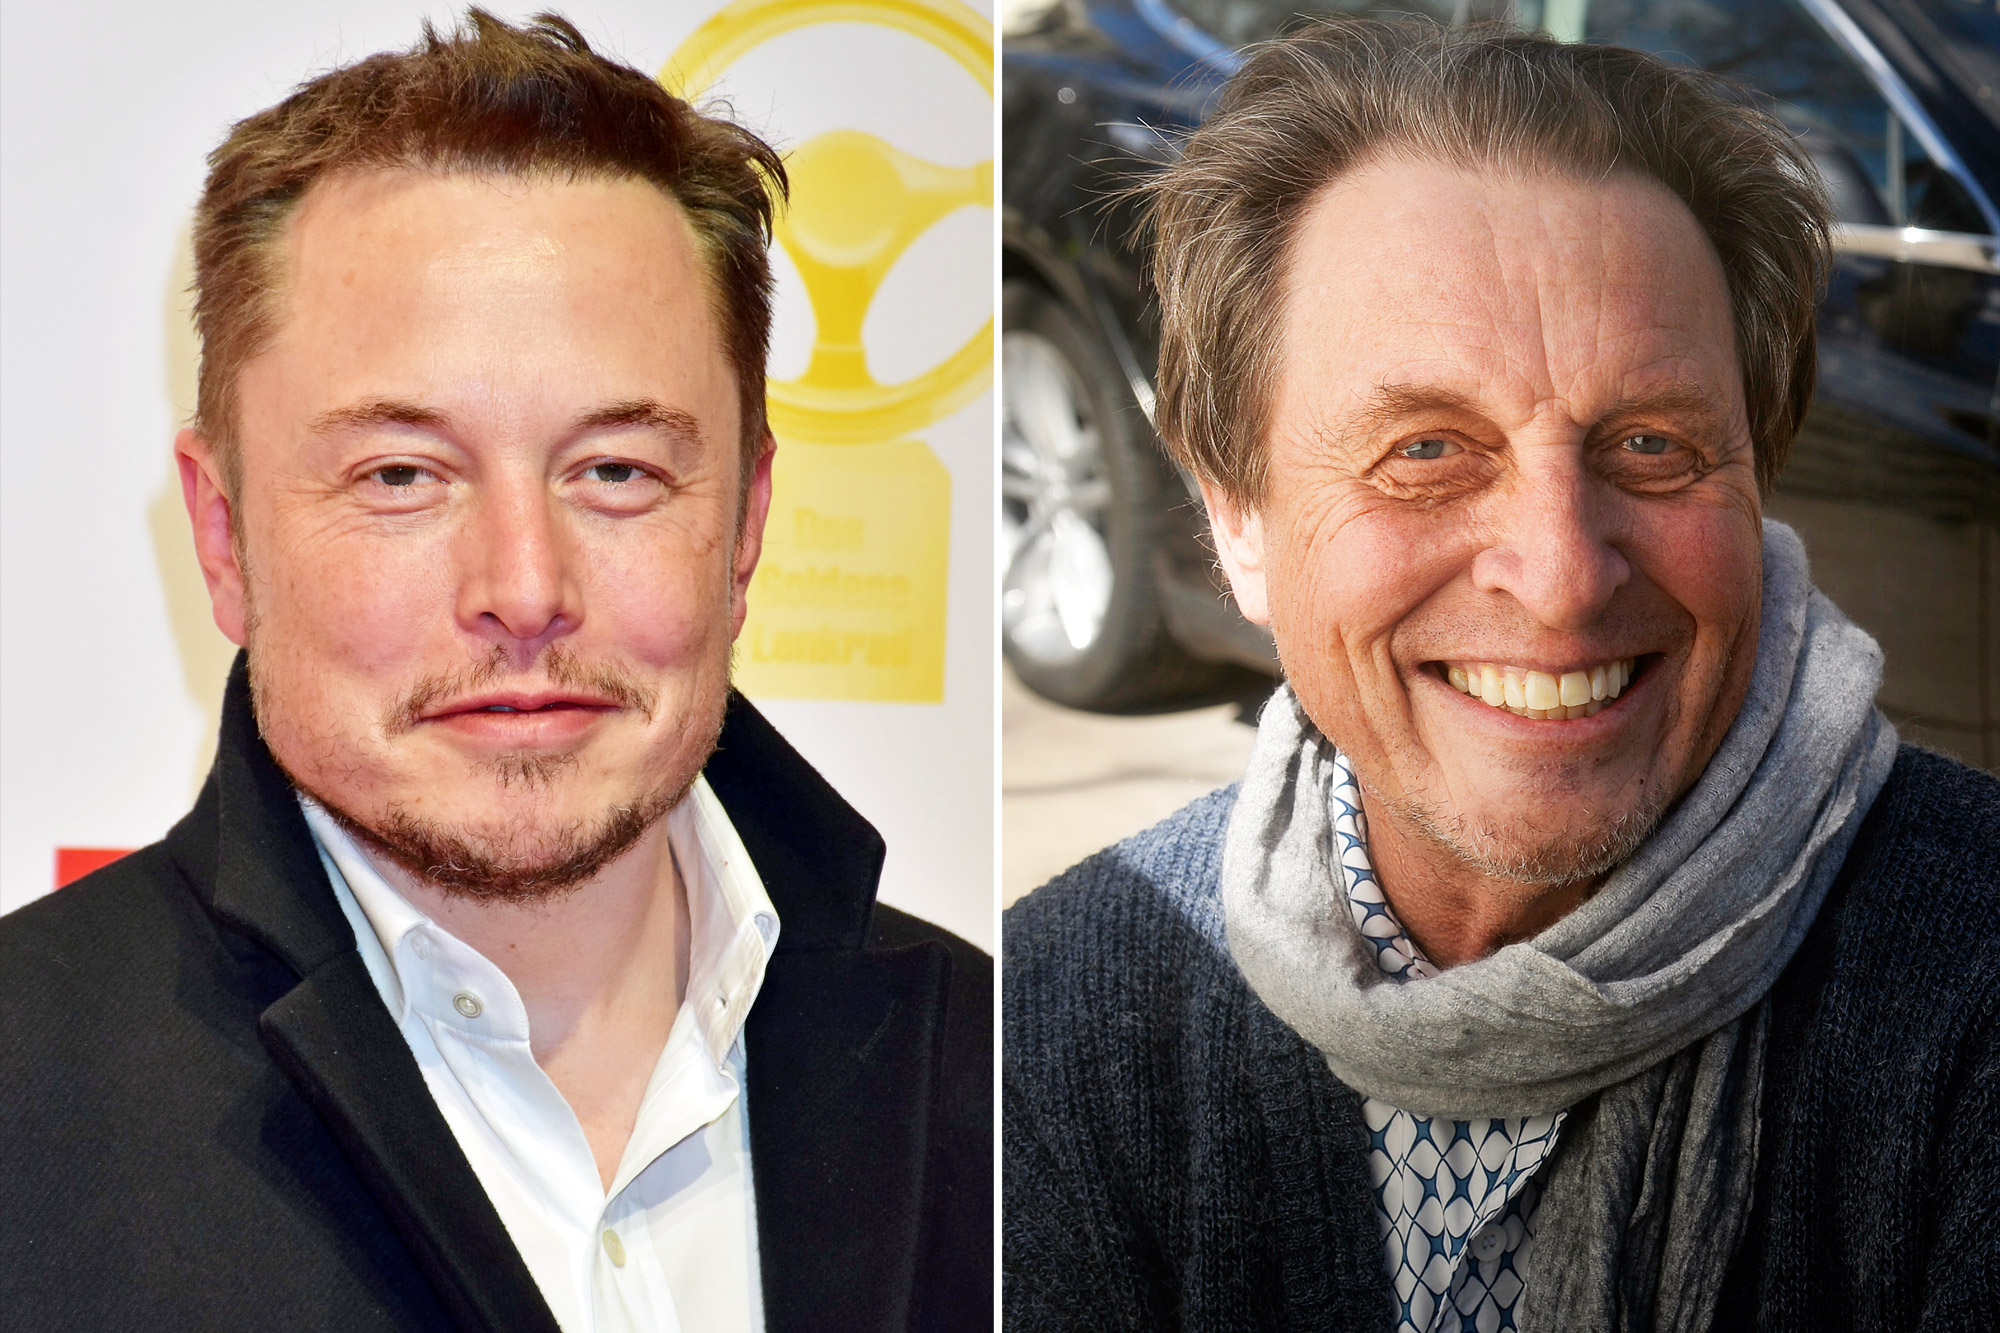 Elon Musk’s dad claims he was approached to donate his sperm to “high class” women